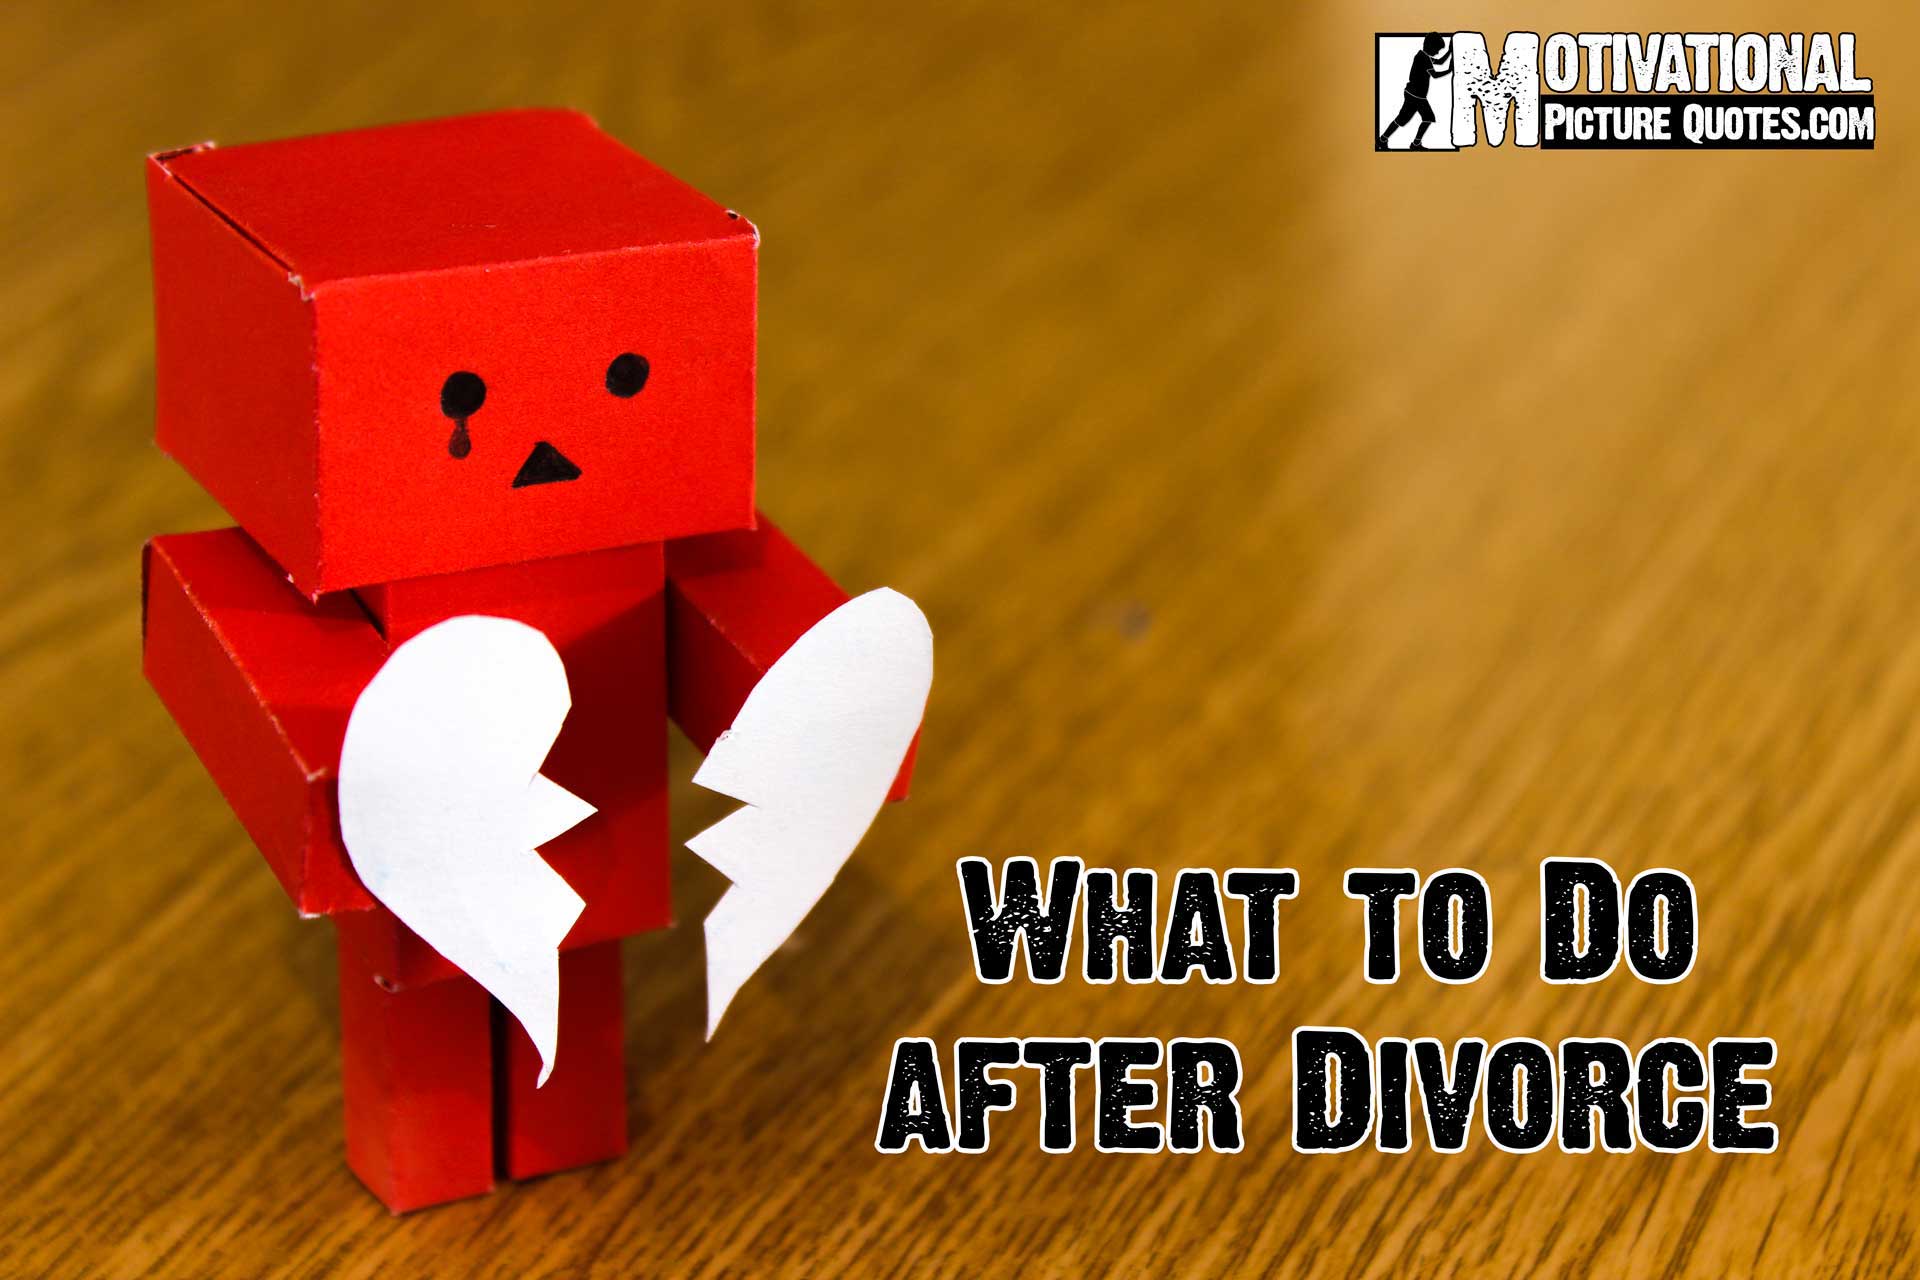 What to Do after Divorce